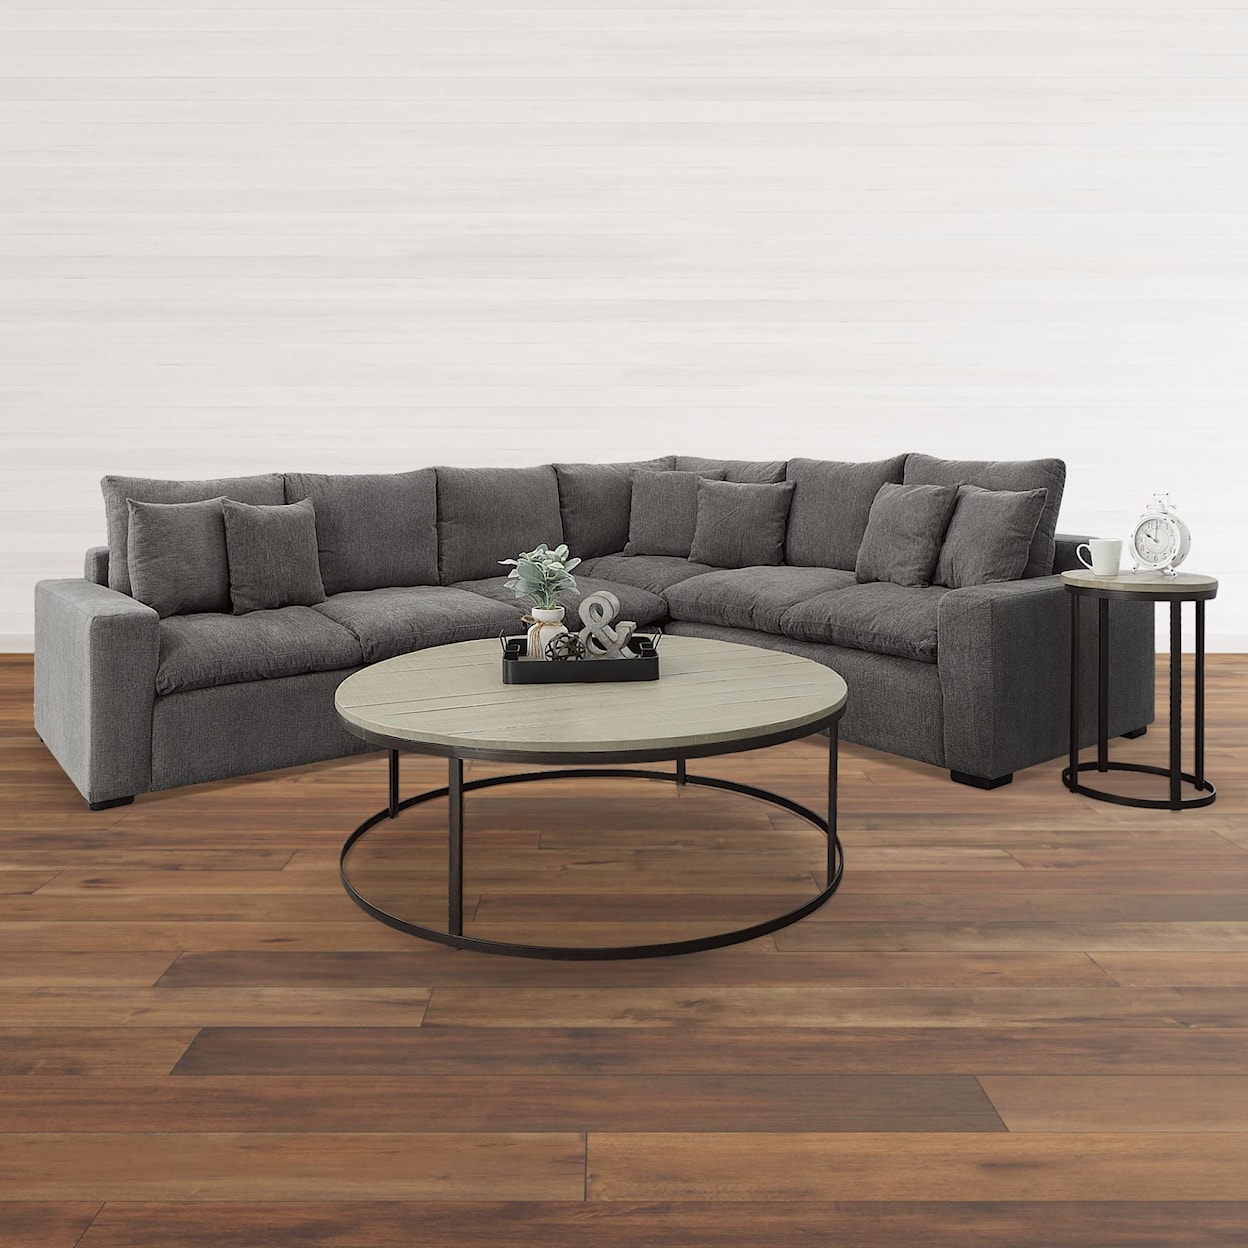 Elements Frederick Natural Natural Round Coffee Table